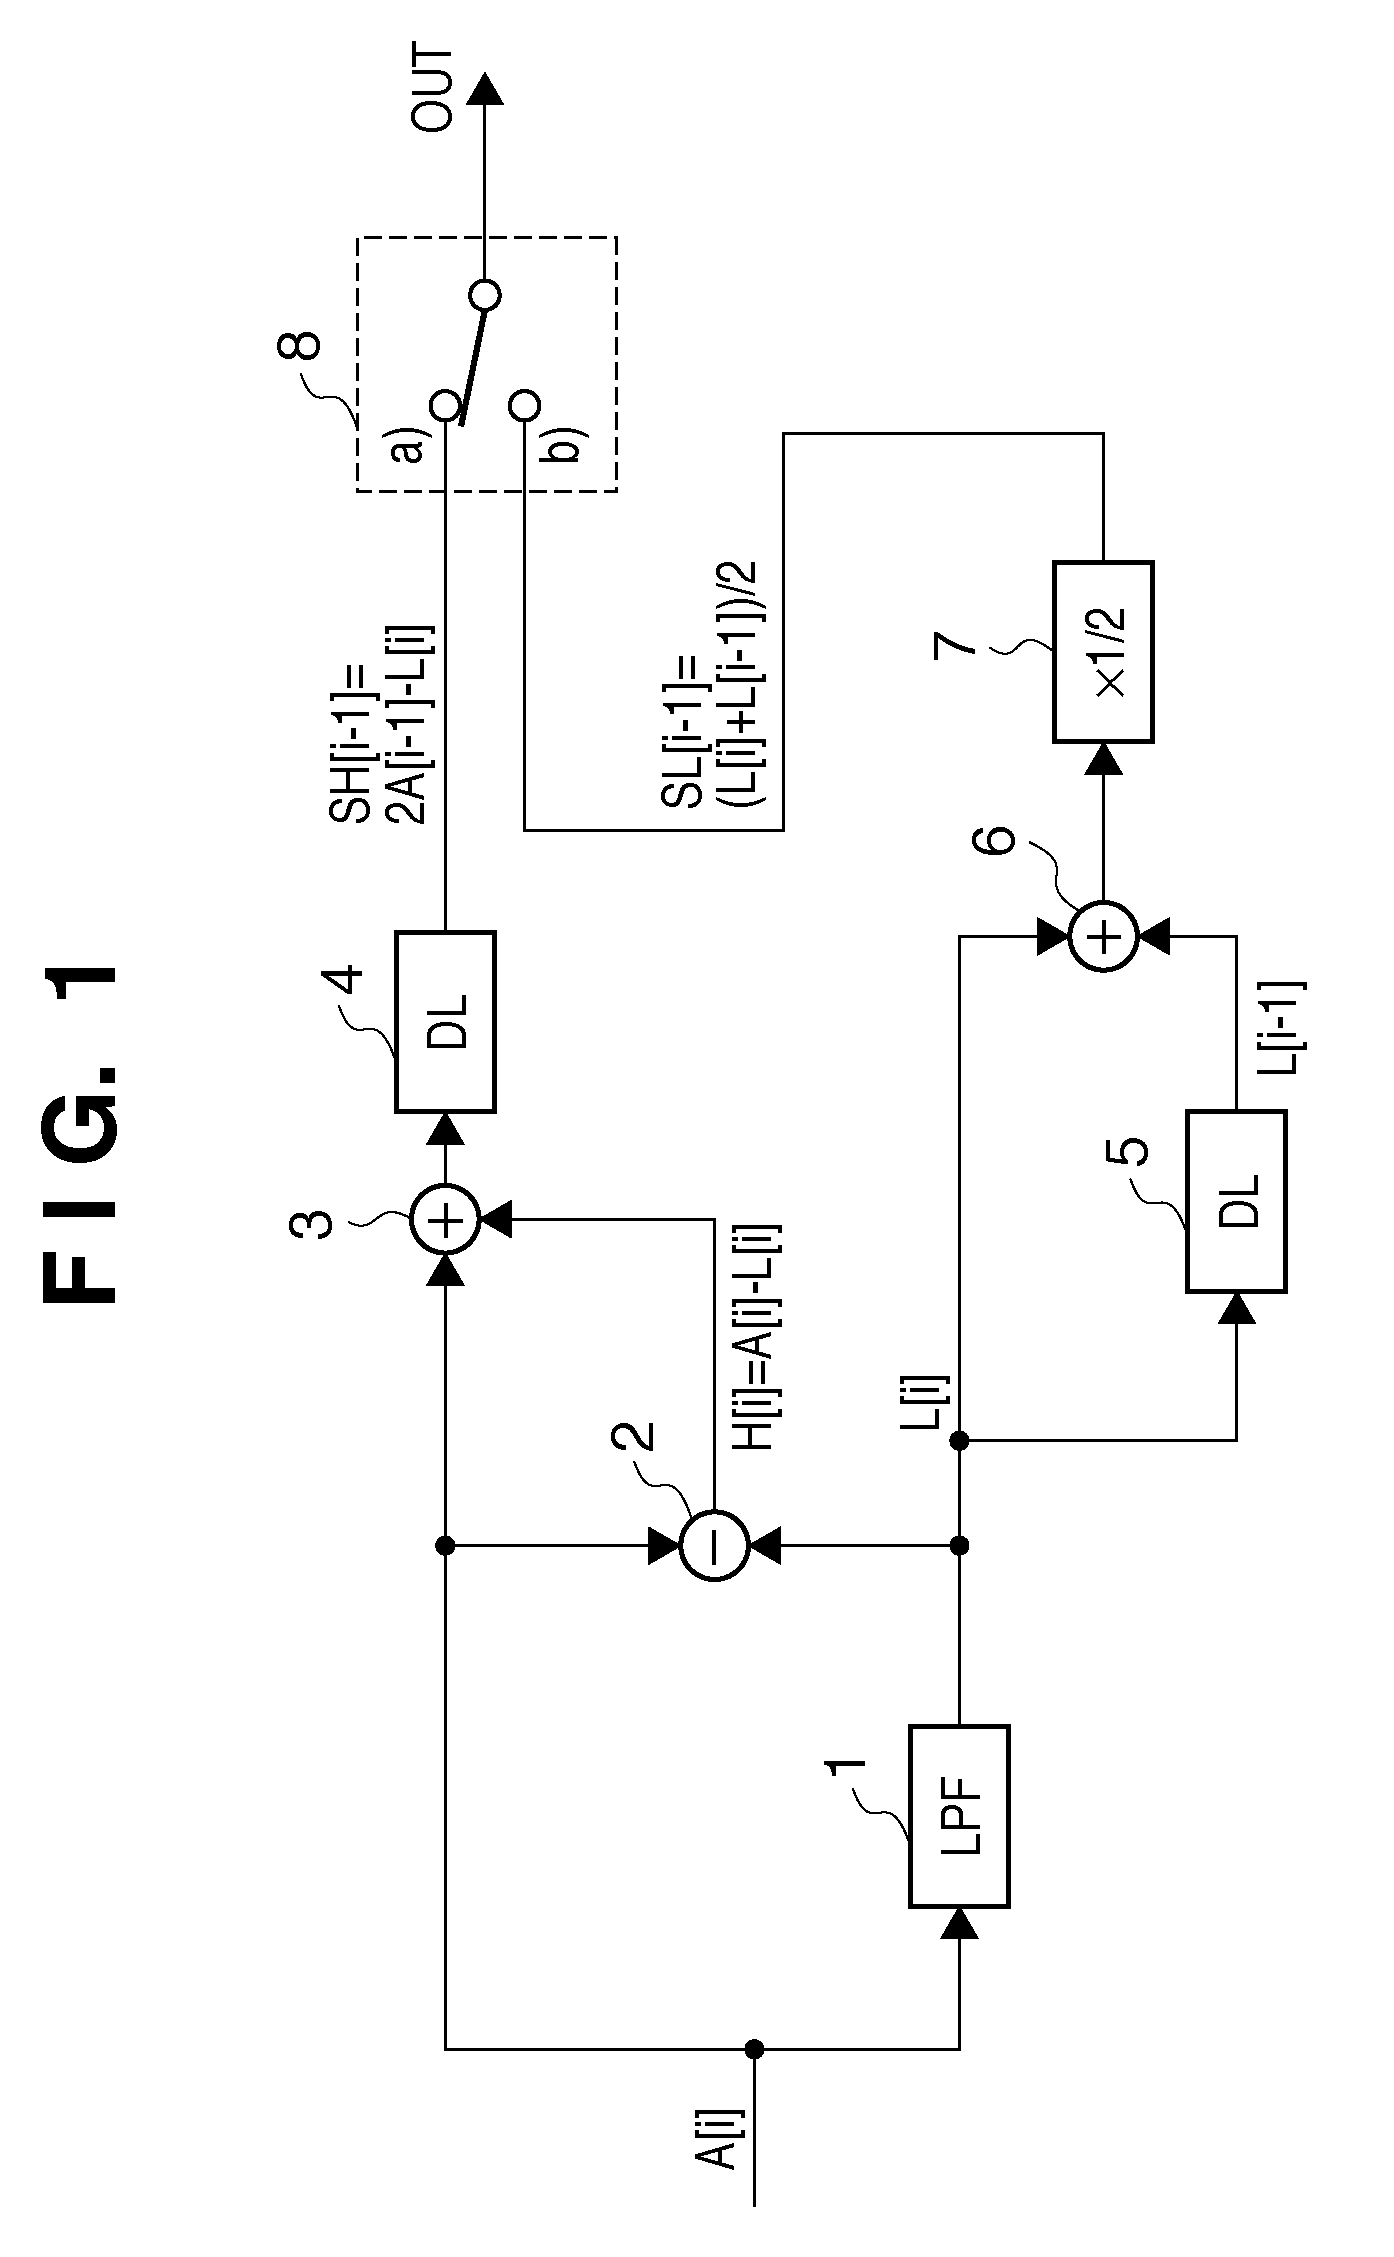 Image processing apparatus and method of controlling the same